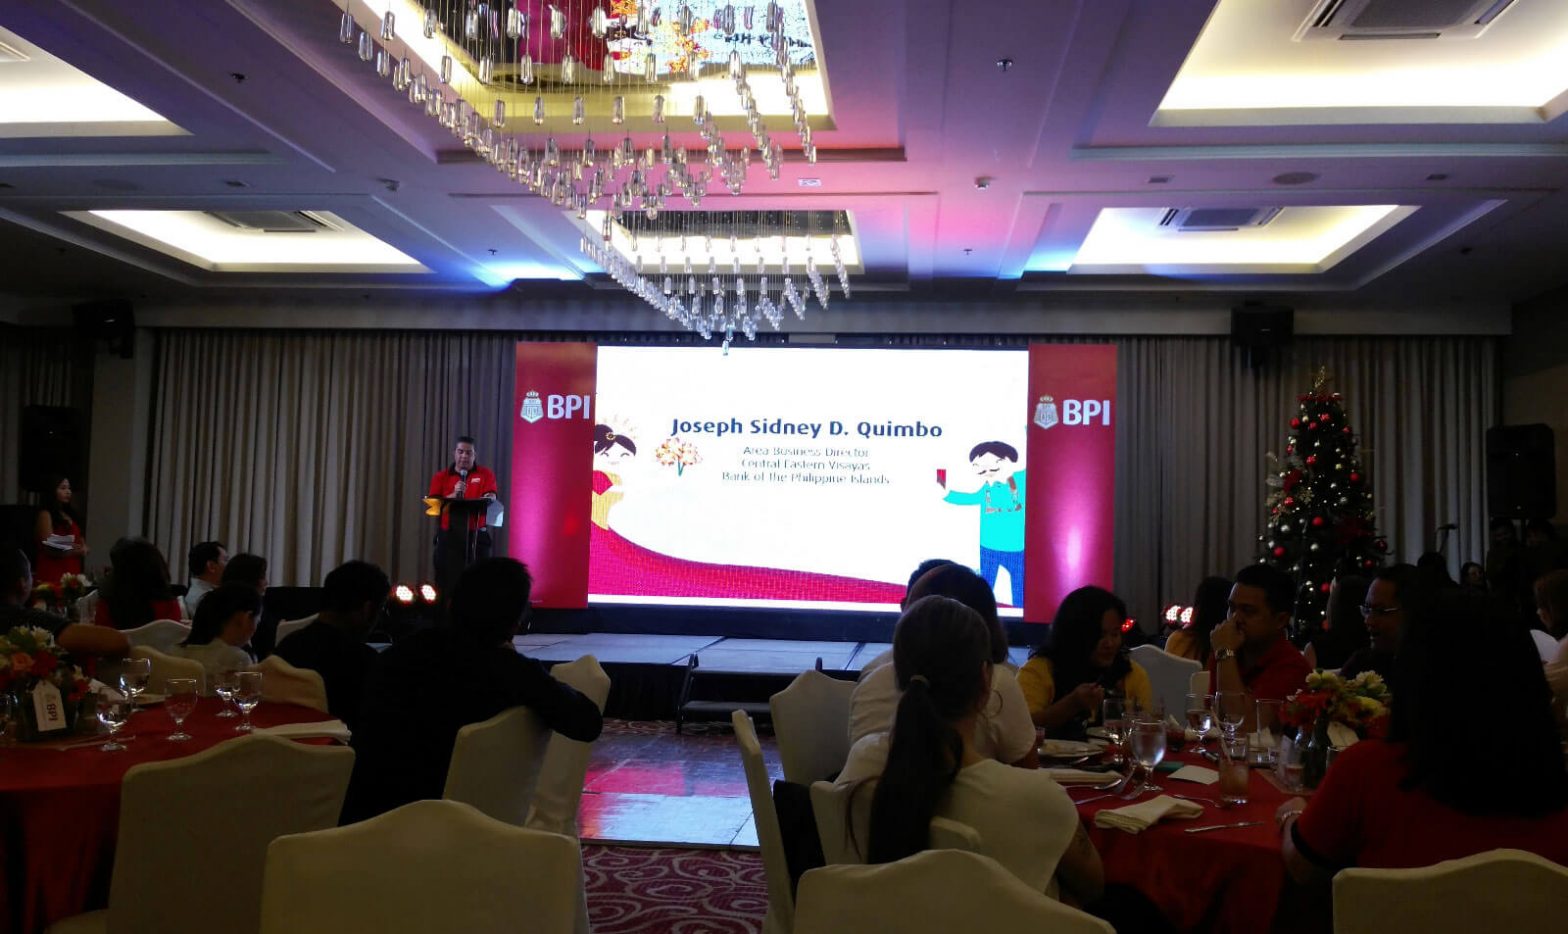 BPI Make the Best Happen campaign enables Pinoy life goals